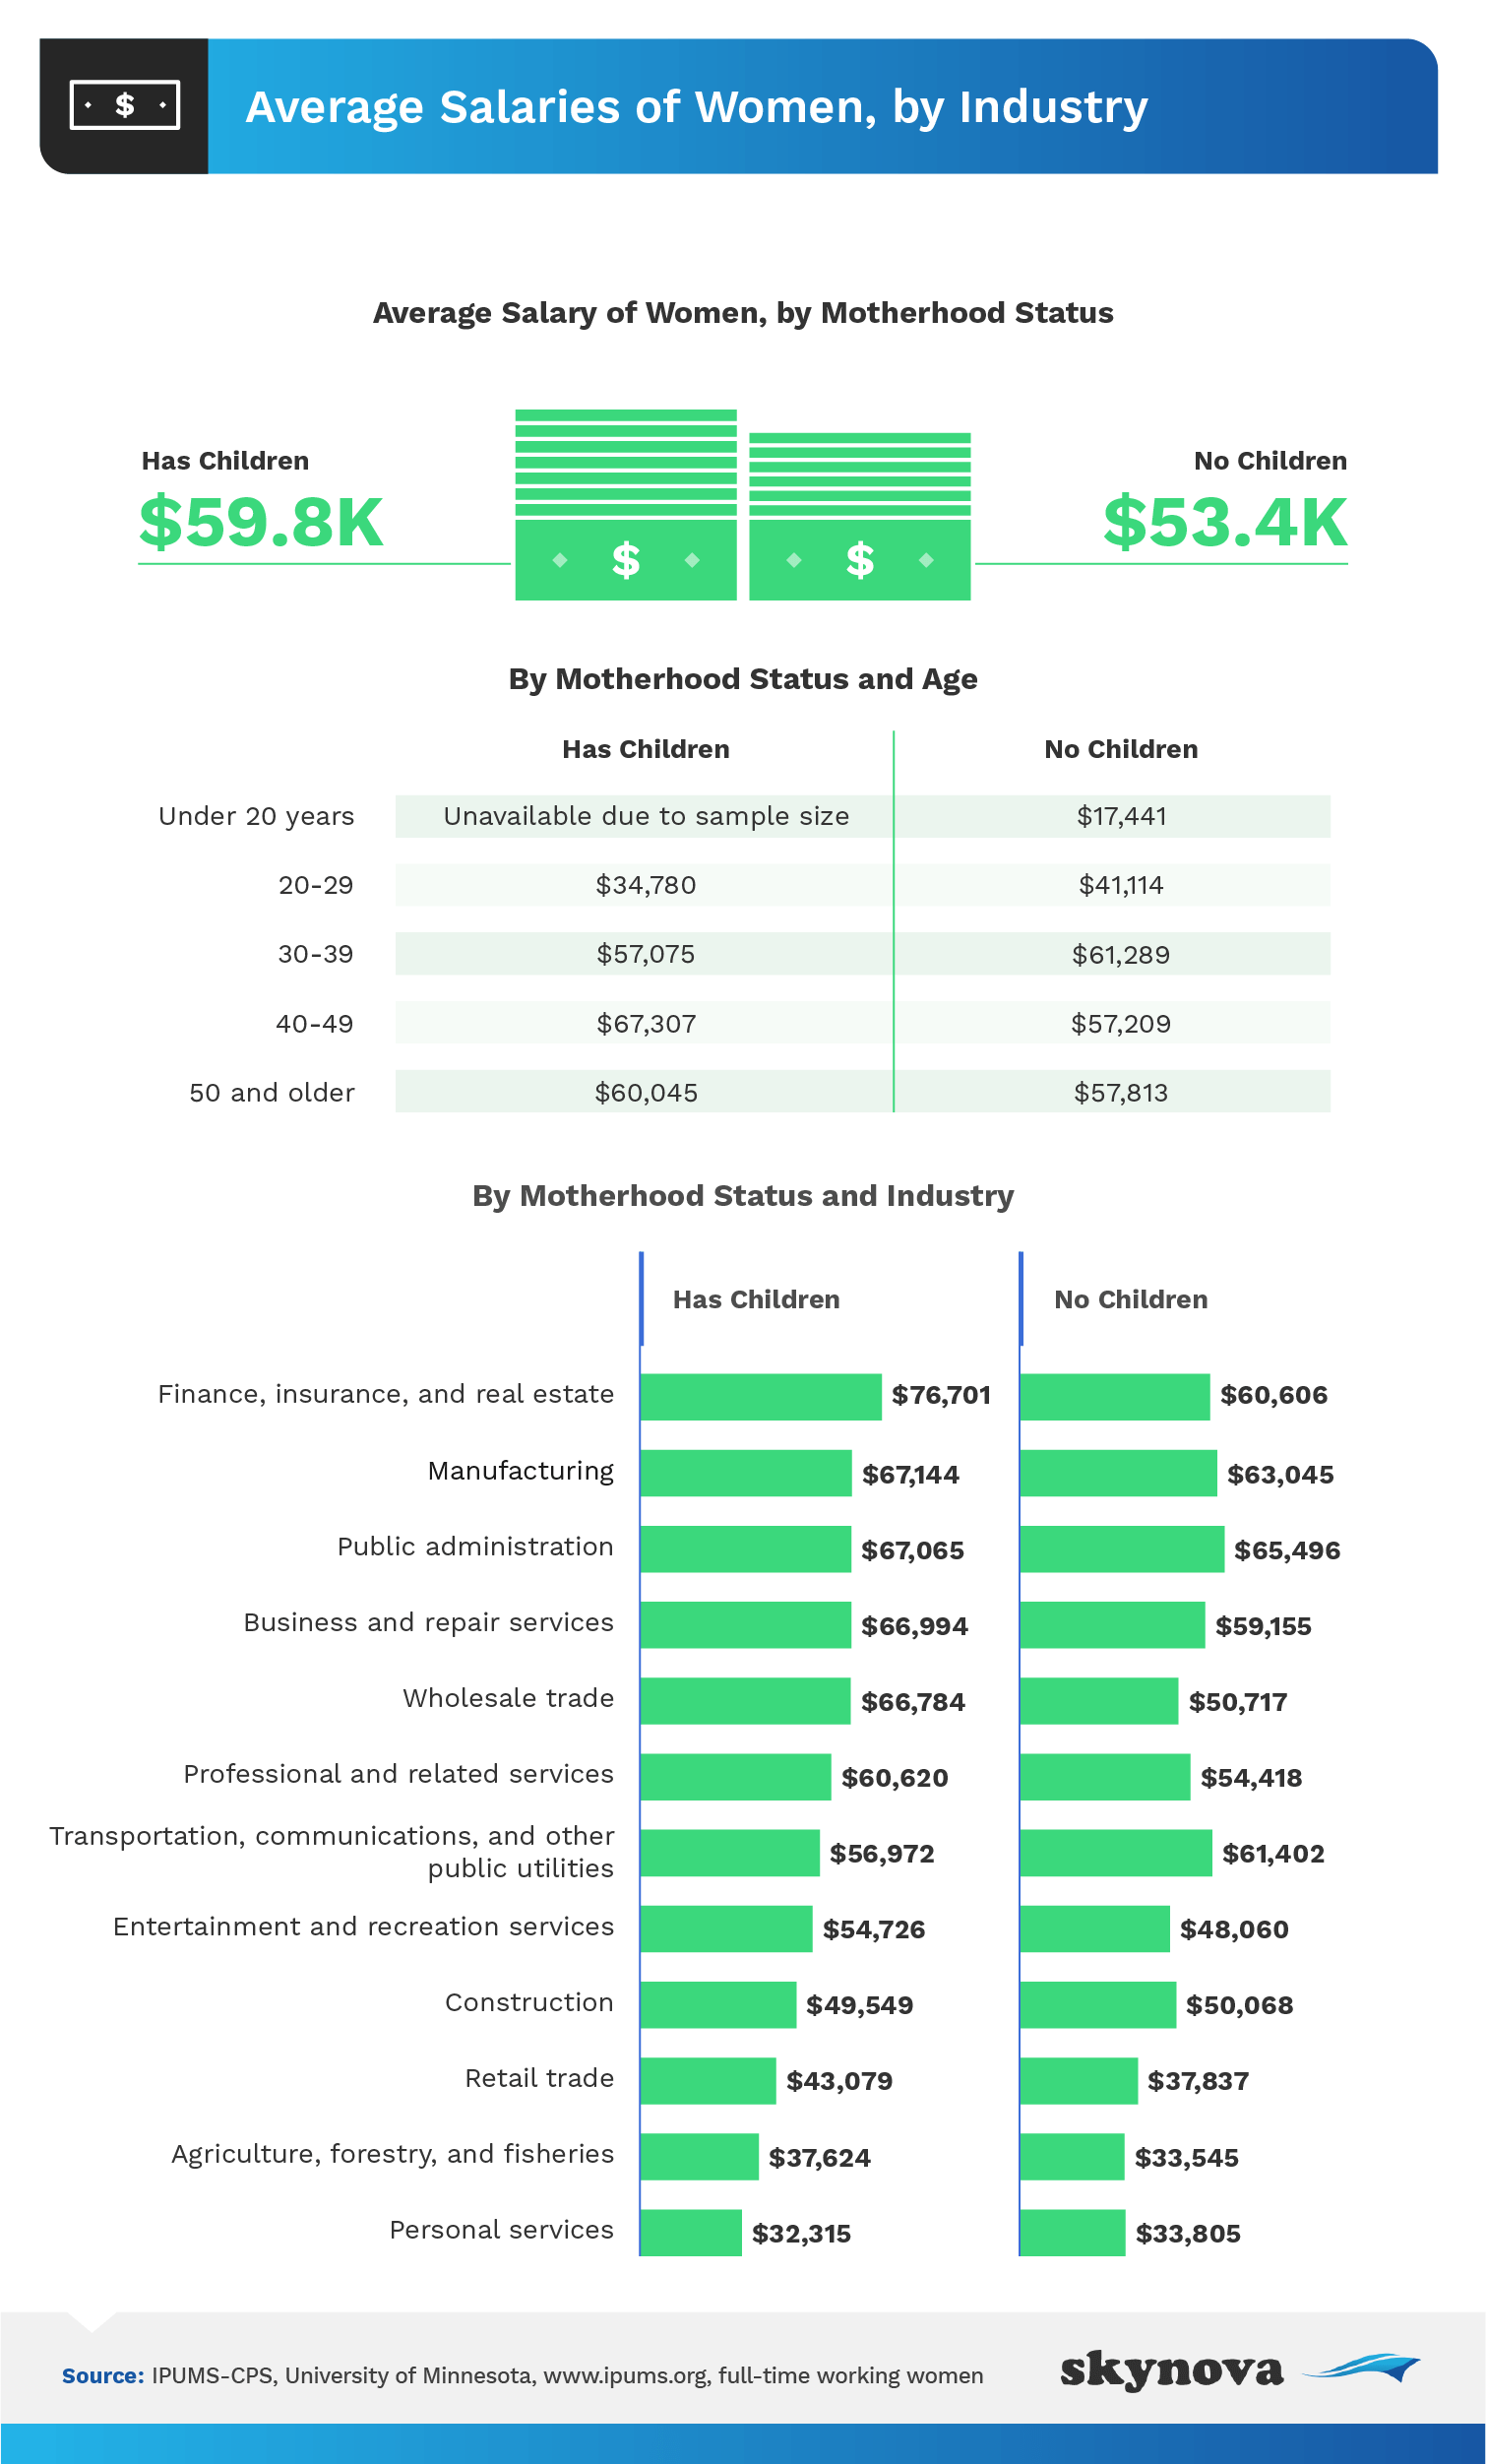 Average Salaries of Women by Industry, with Kids and Without